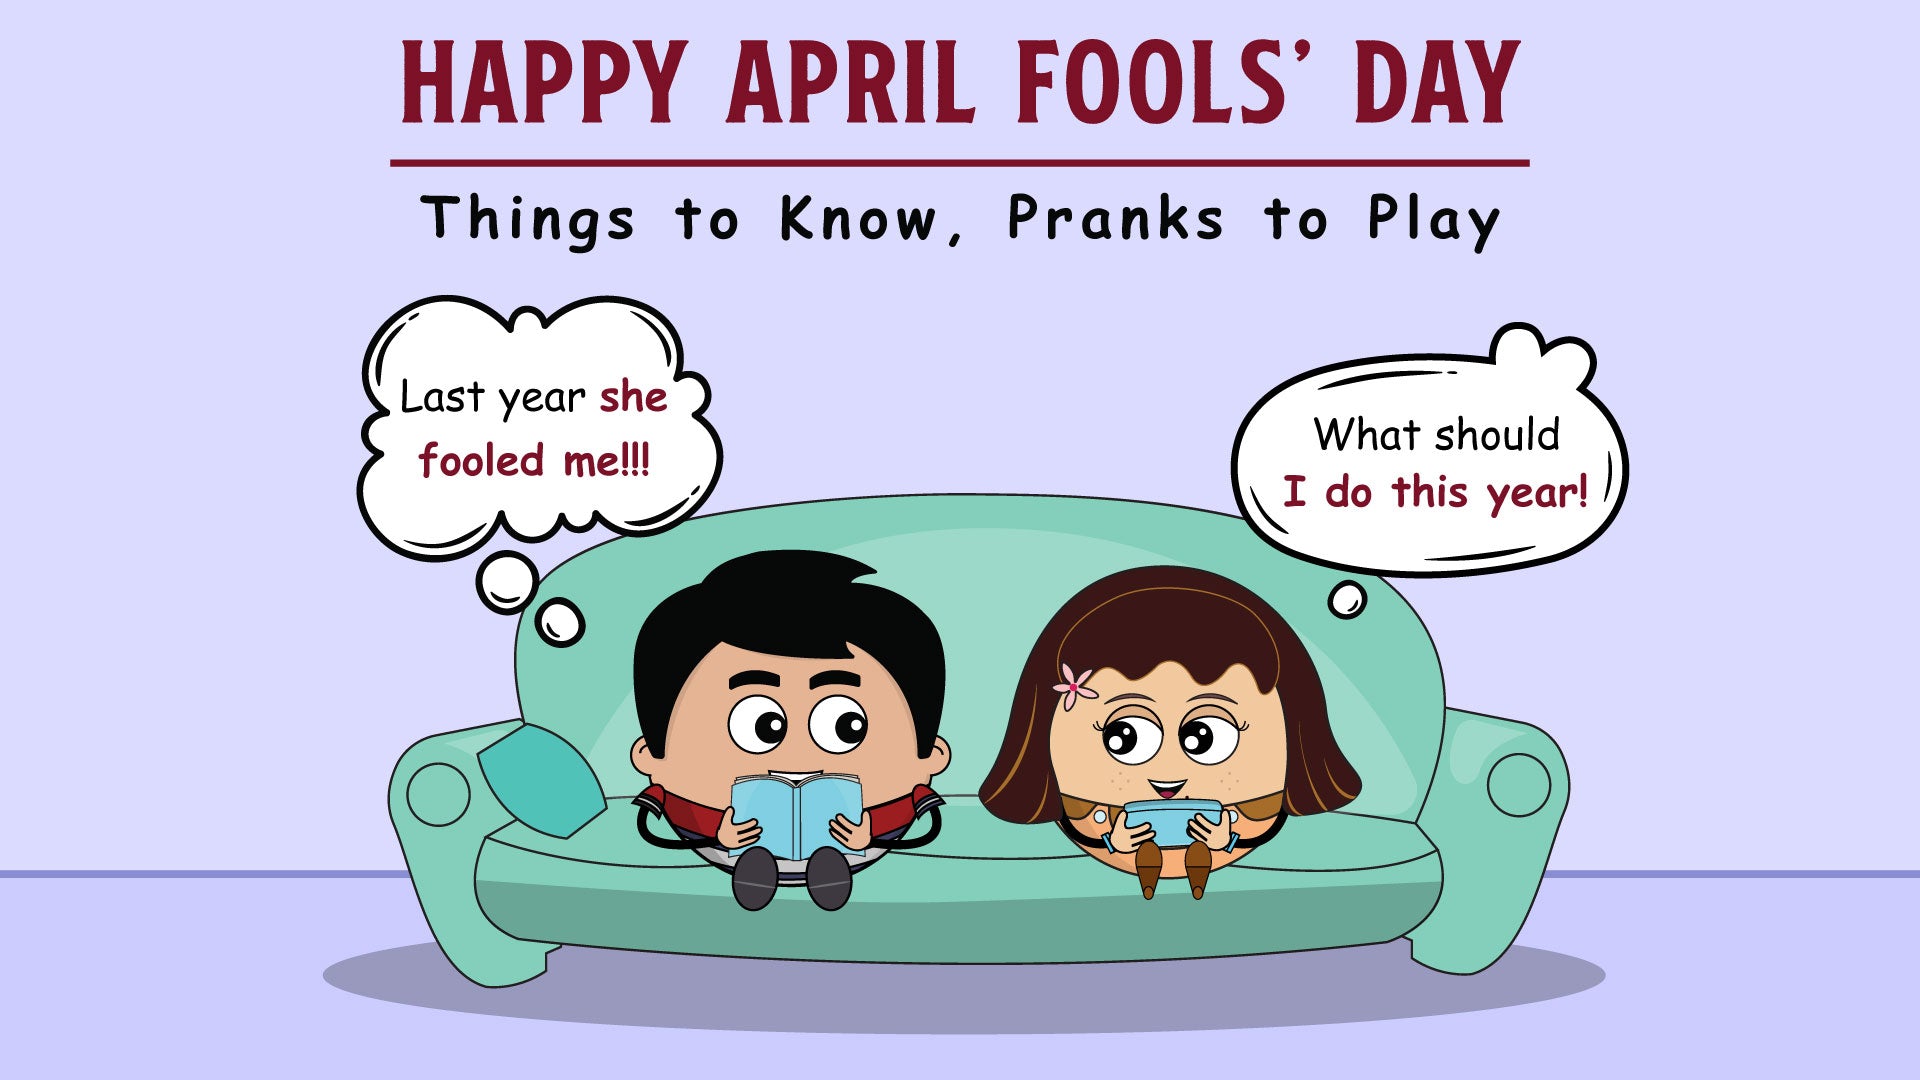 5 Interesting April Fools’ Day Ideas to Know About